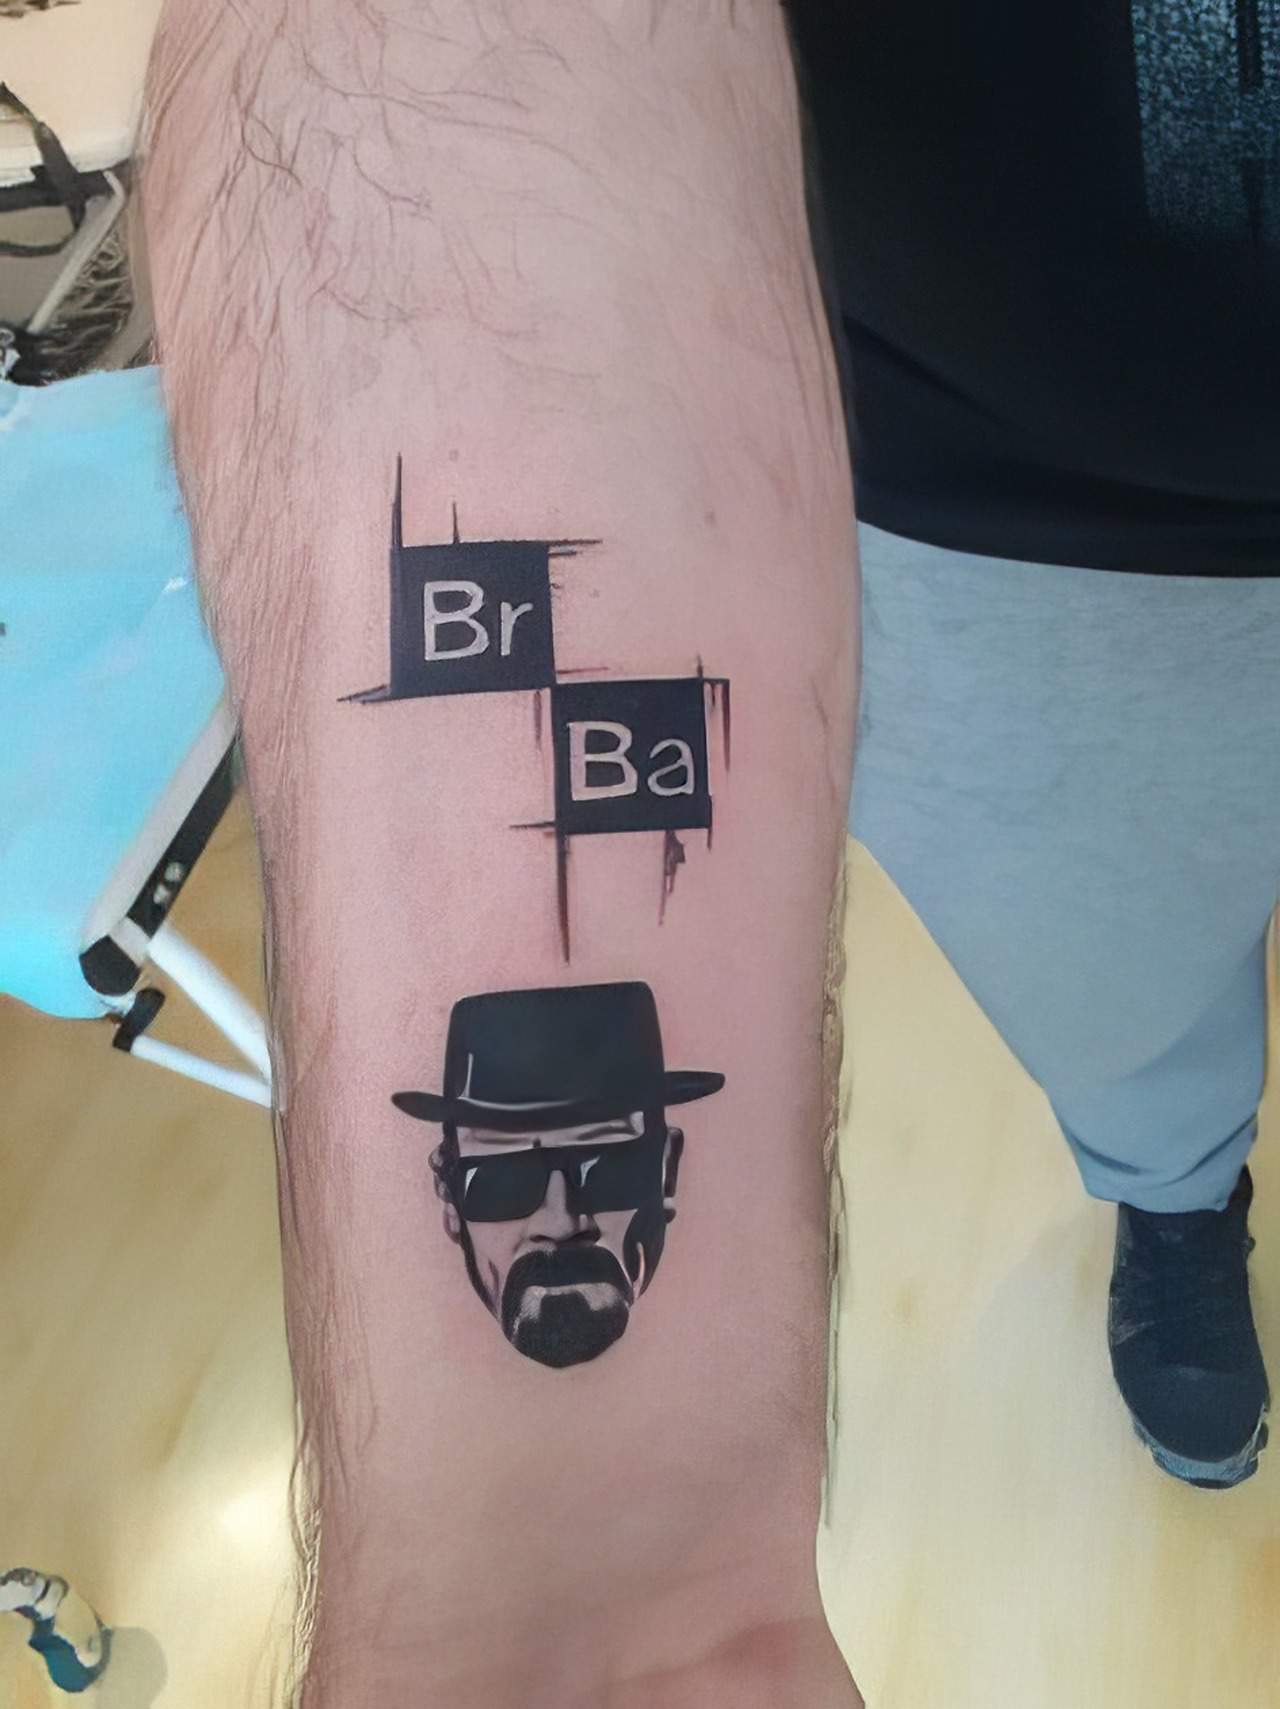 10 Nerdy Tattoos That Will Make You Want Your Own Geek Piece